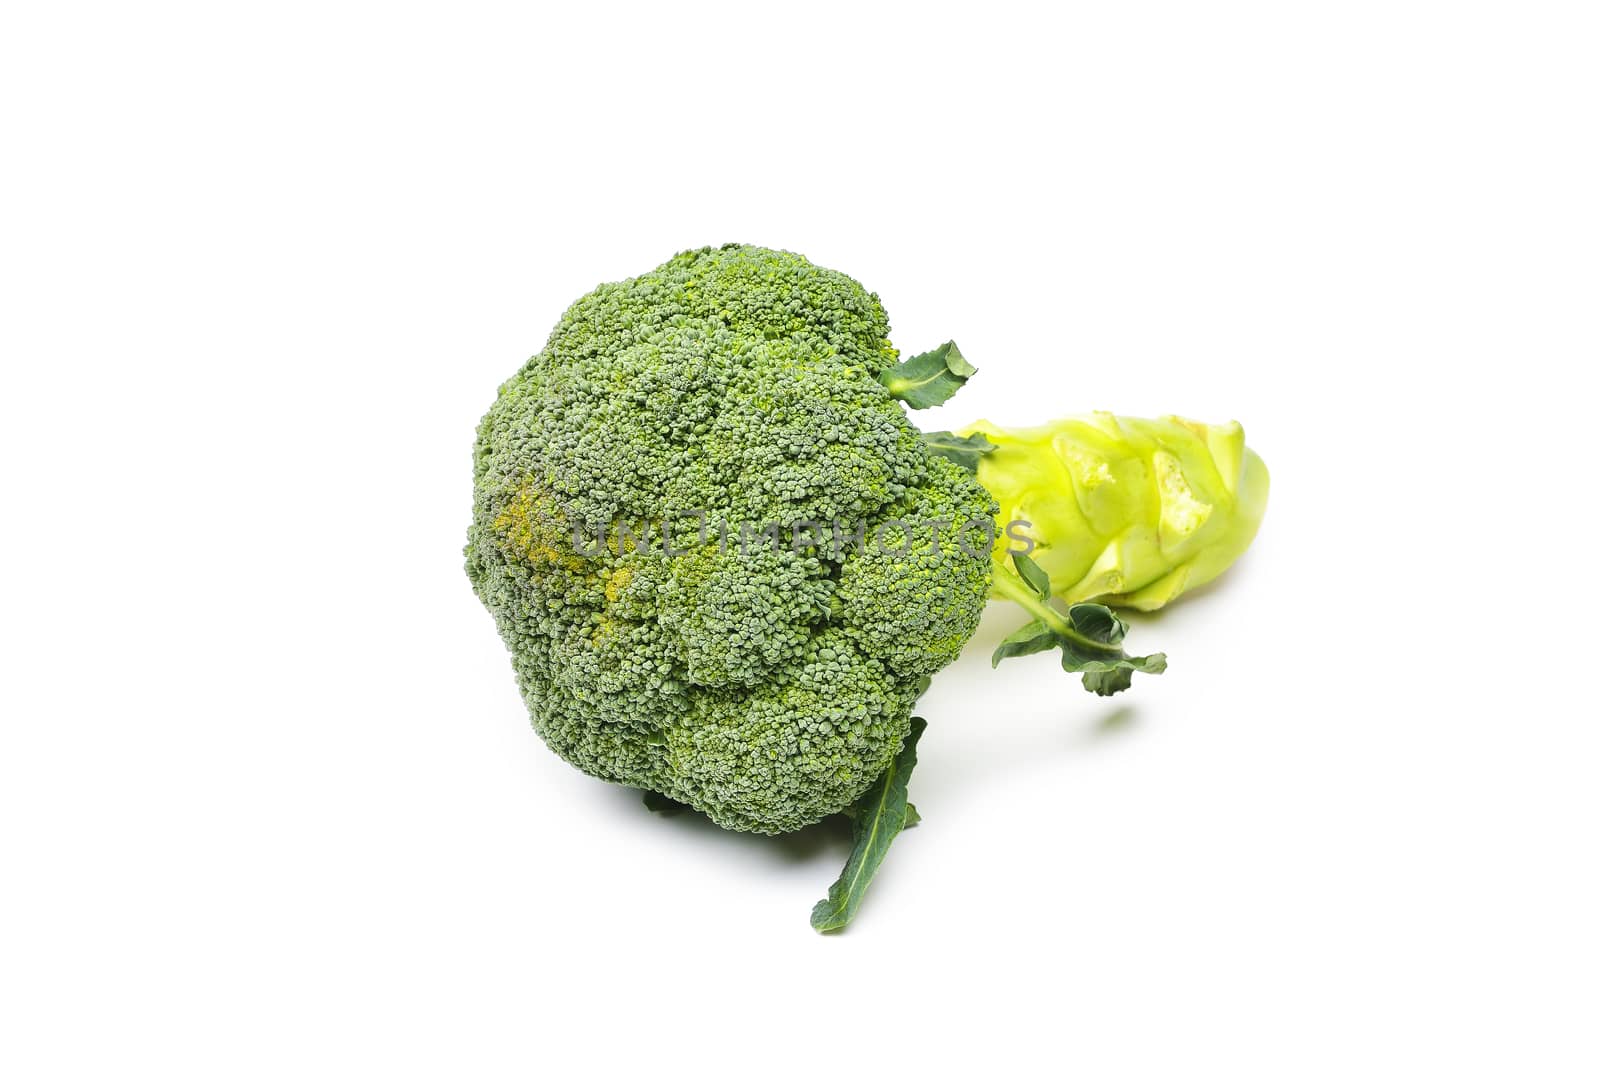 brocoli on a white background by constantinhurghea